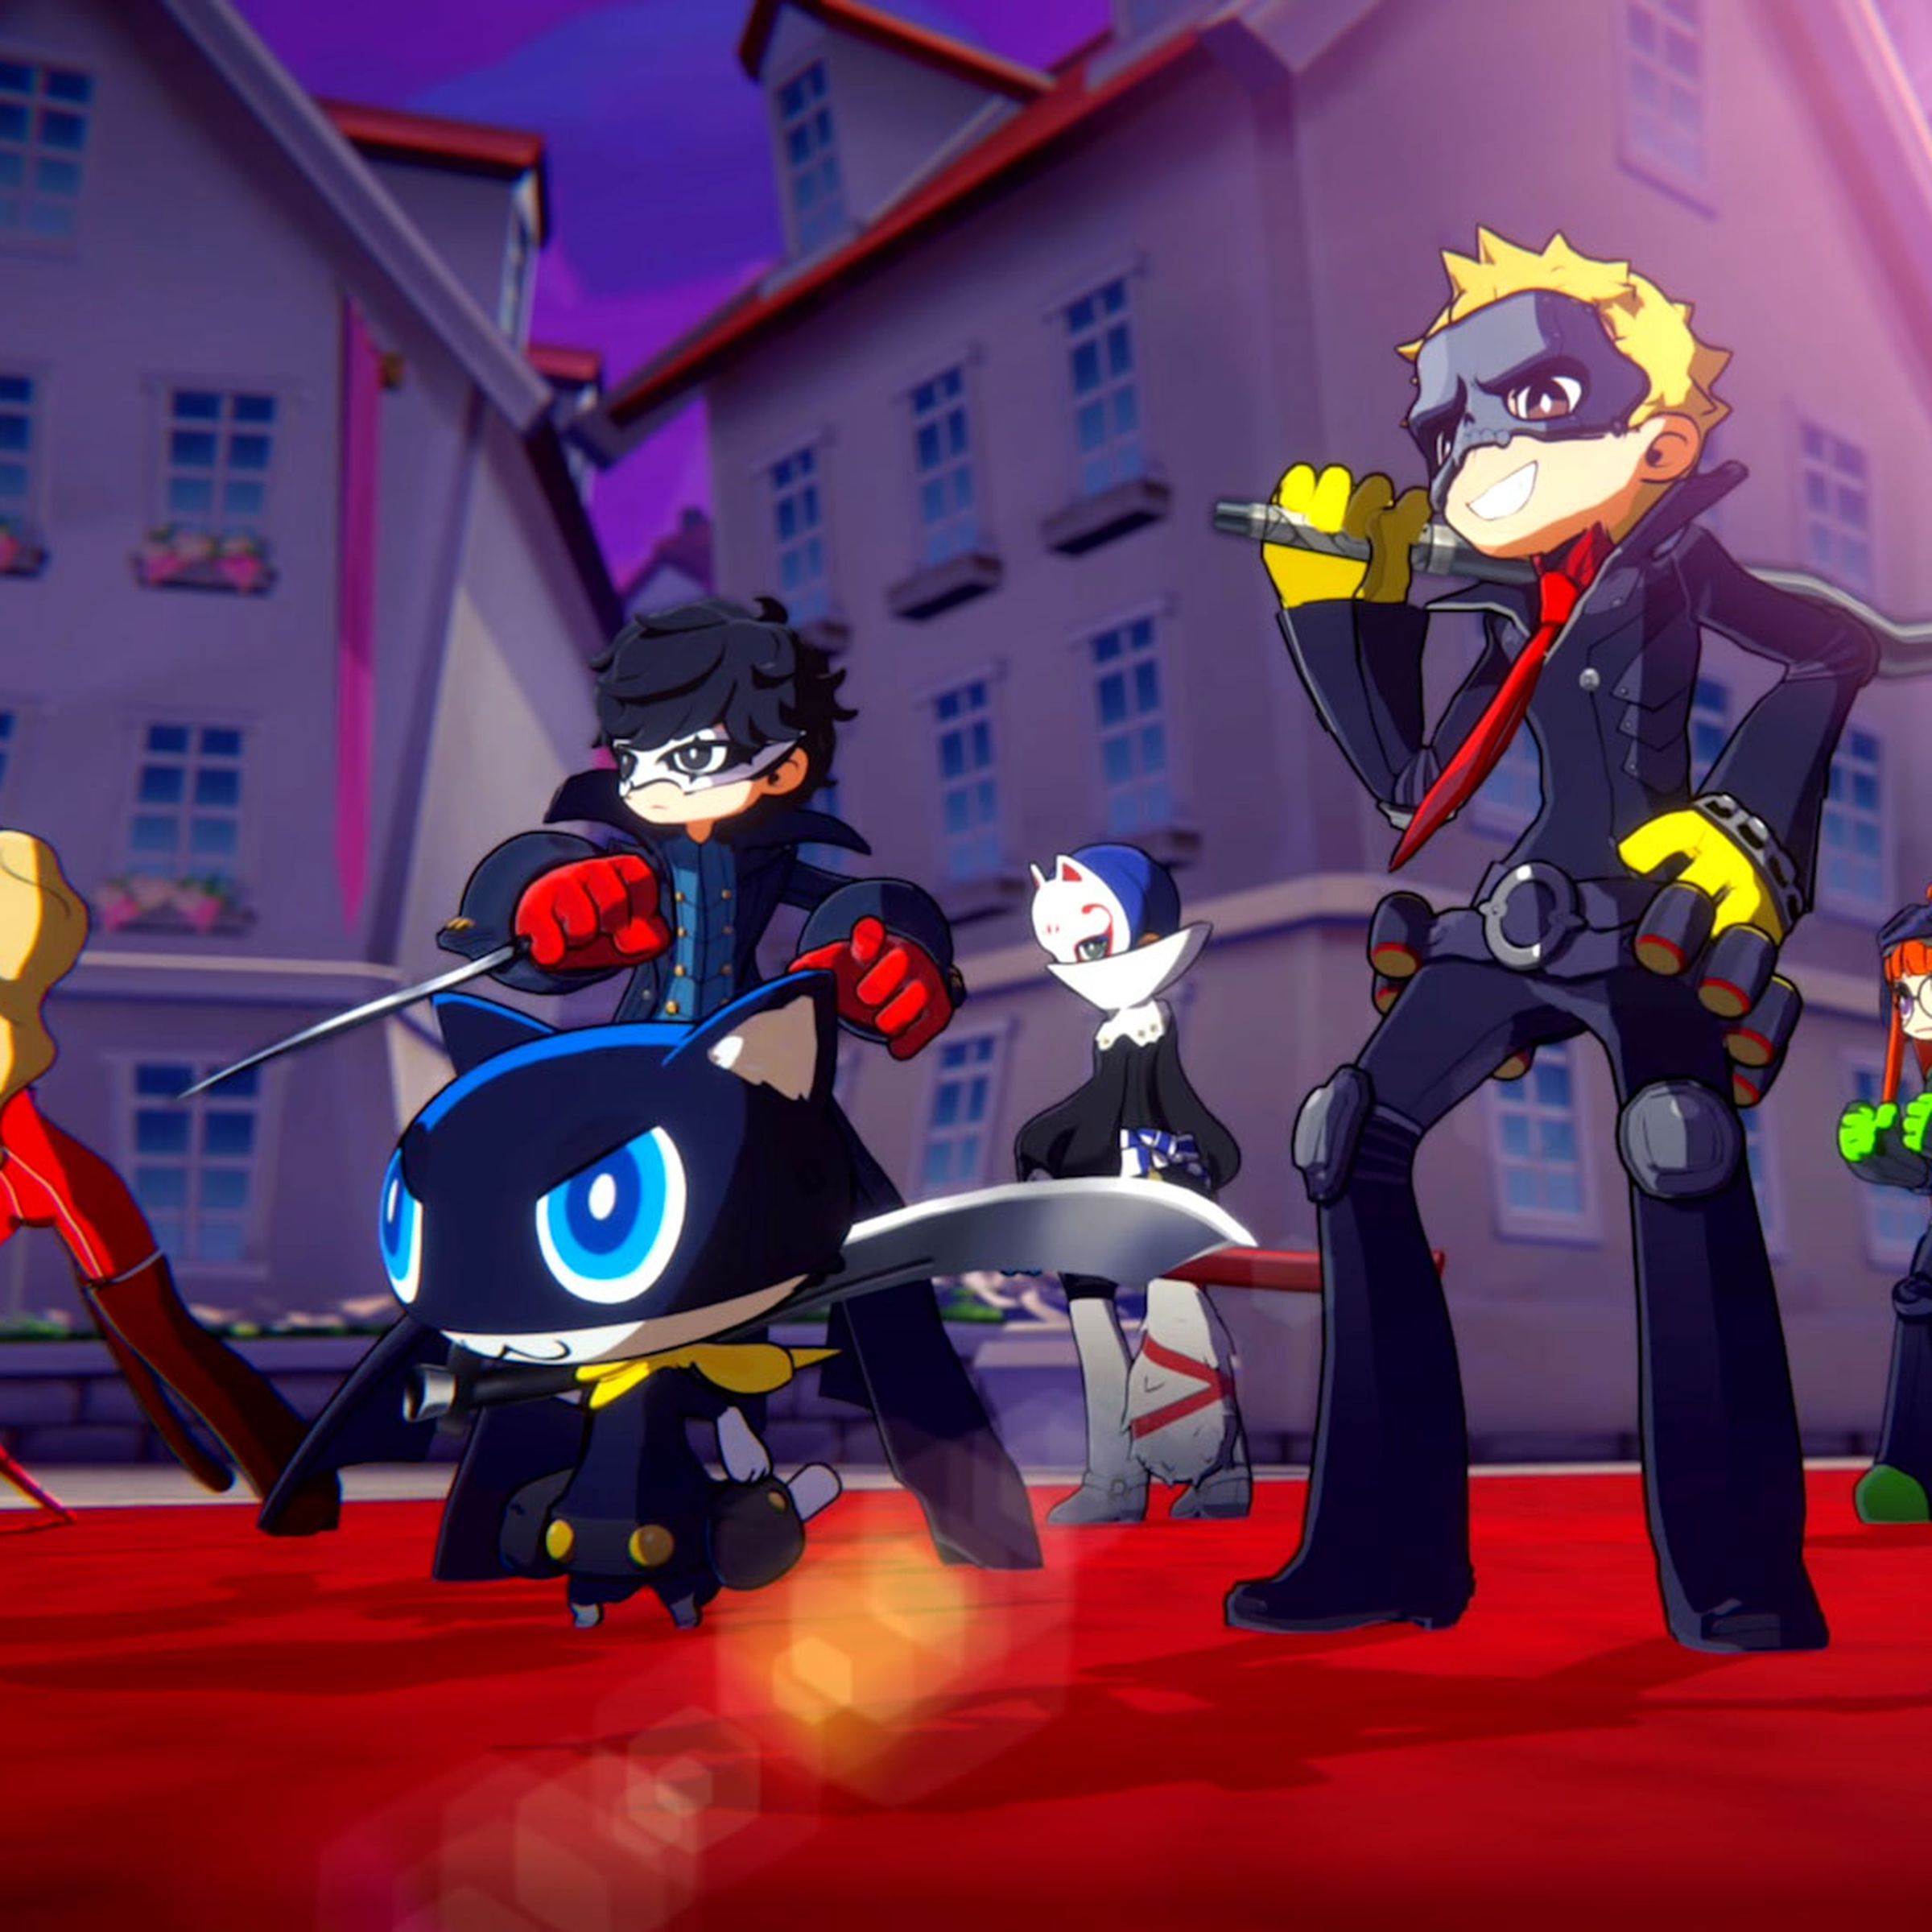 Screenshot from Persona 5 Tactica featuring the Phantom Thieves standing together on a red carpet